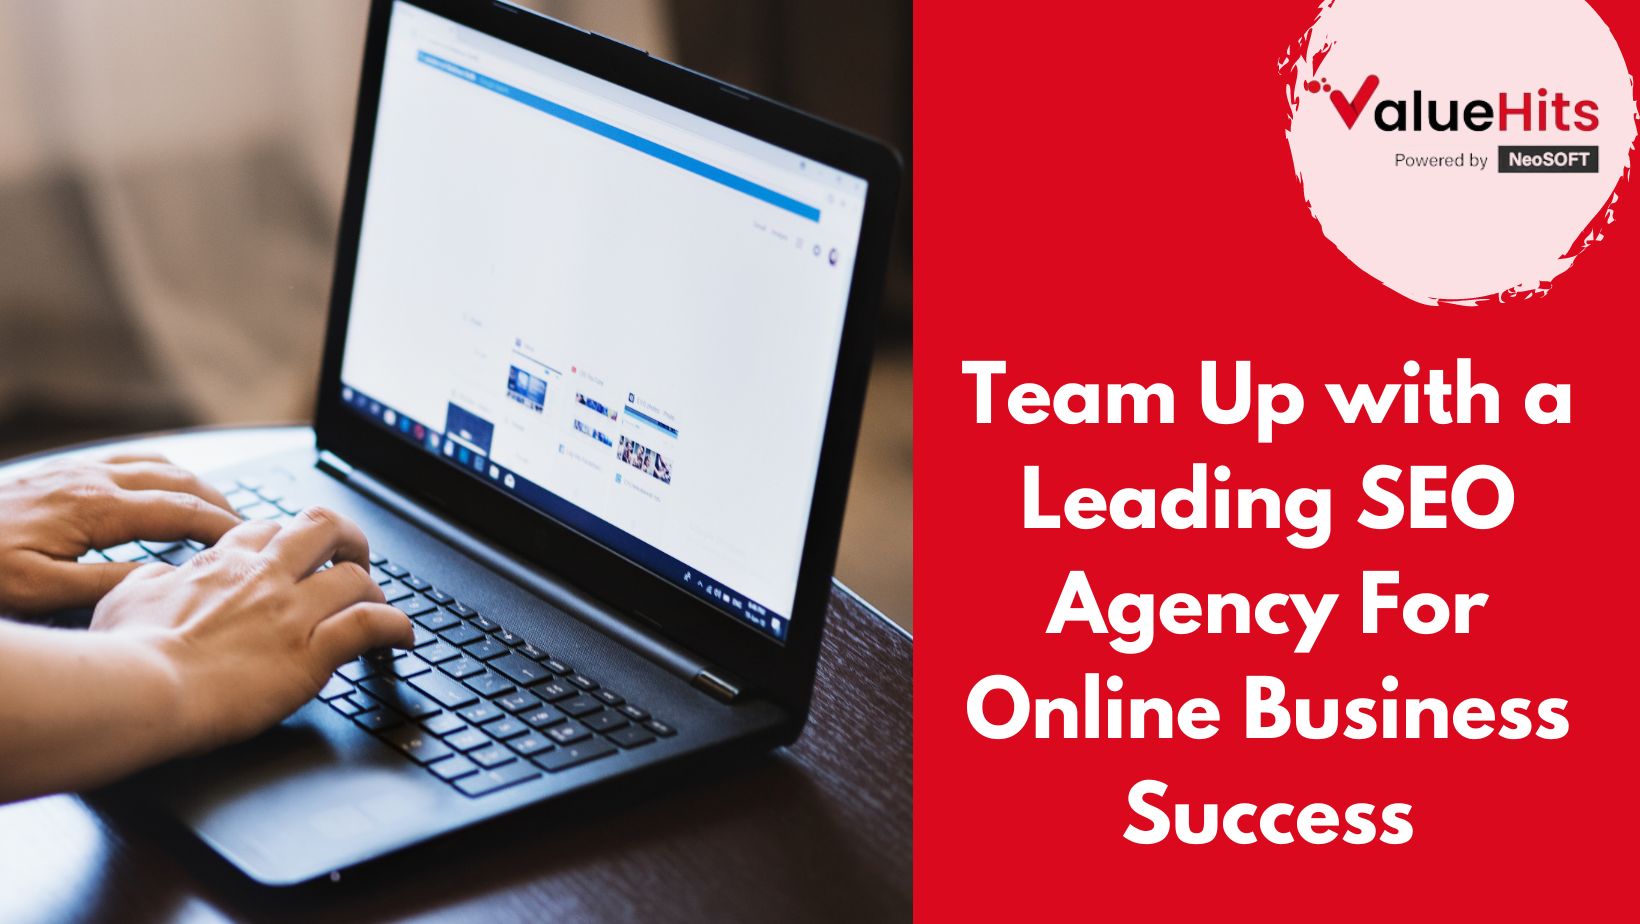 Team Up with a Leading SEO Agency For Online Business Success